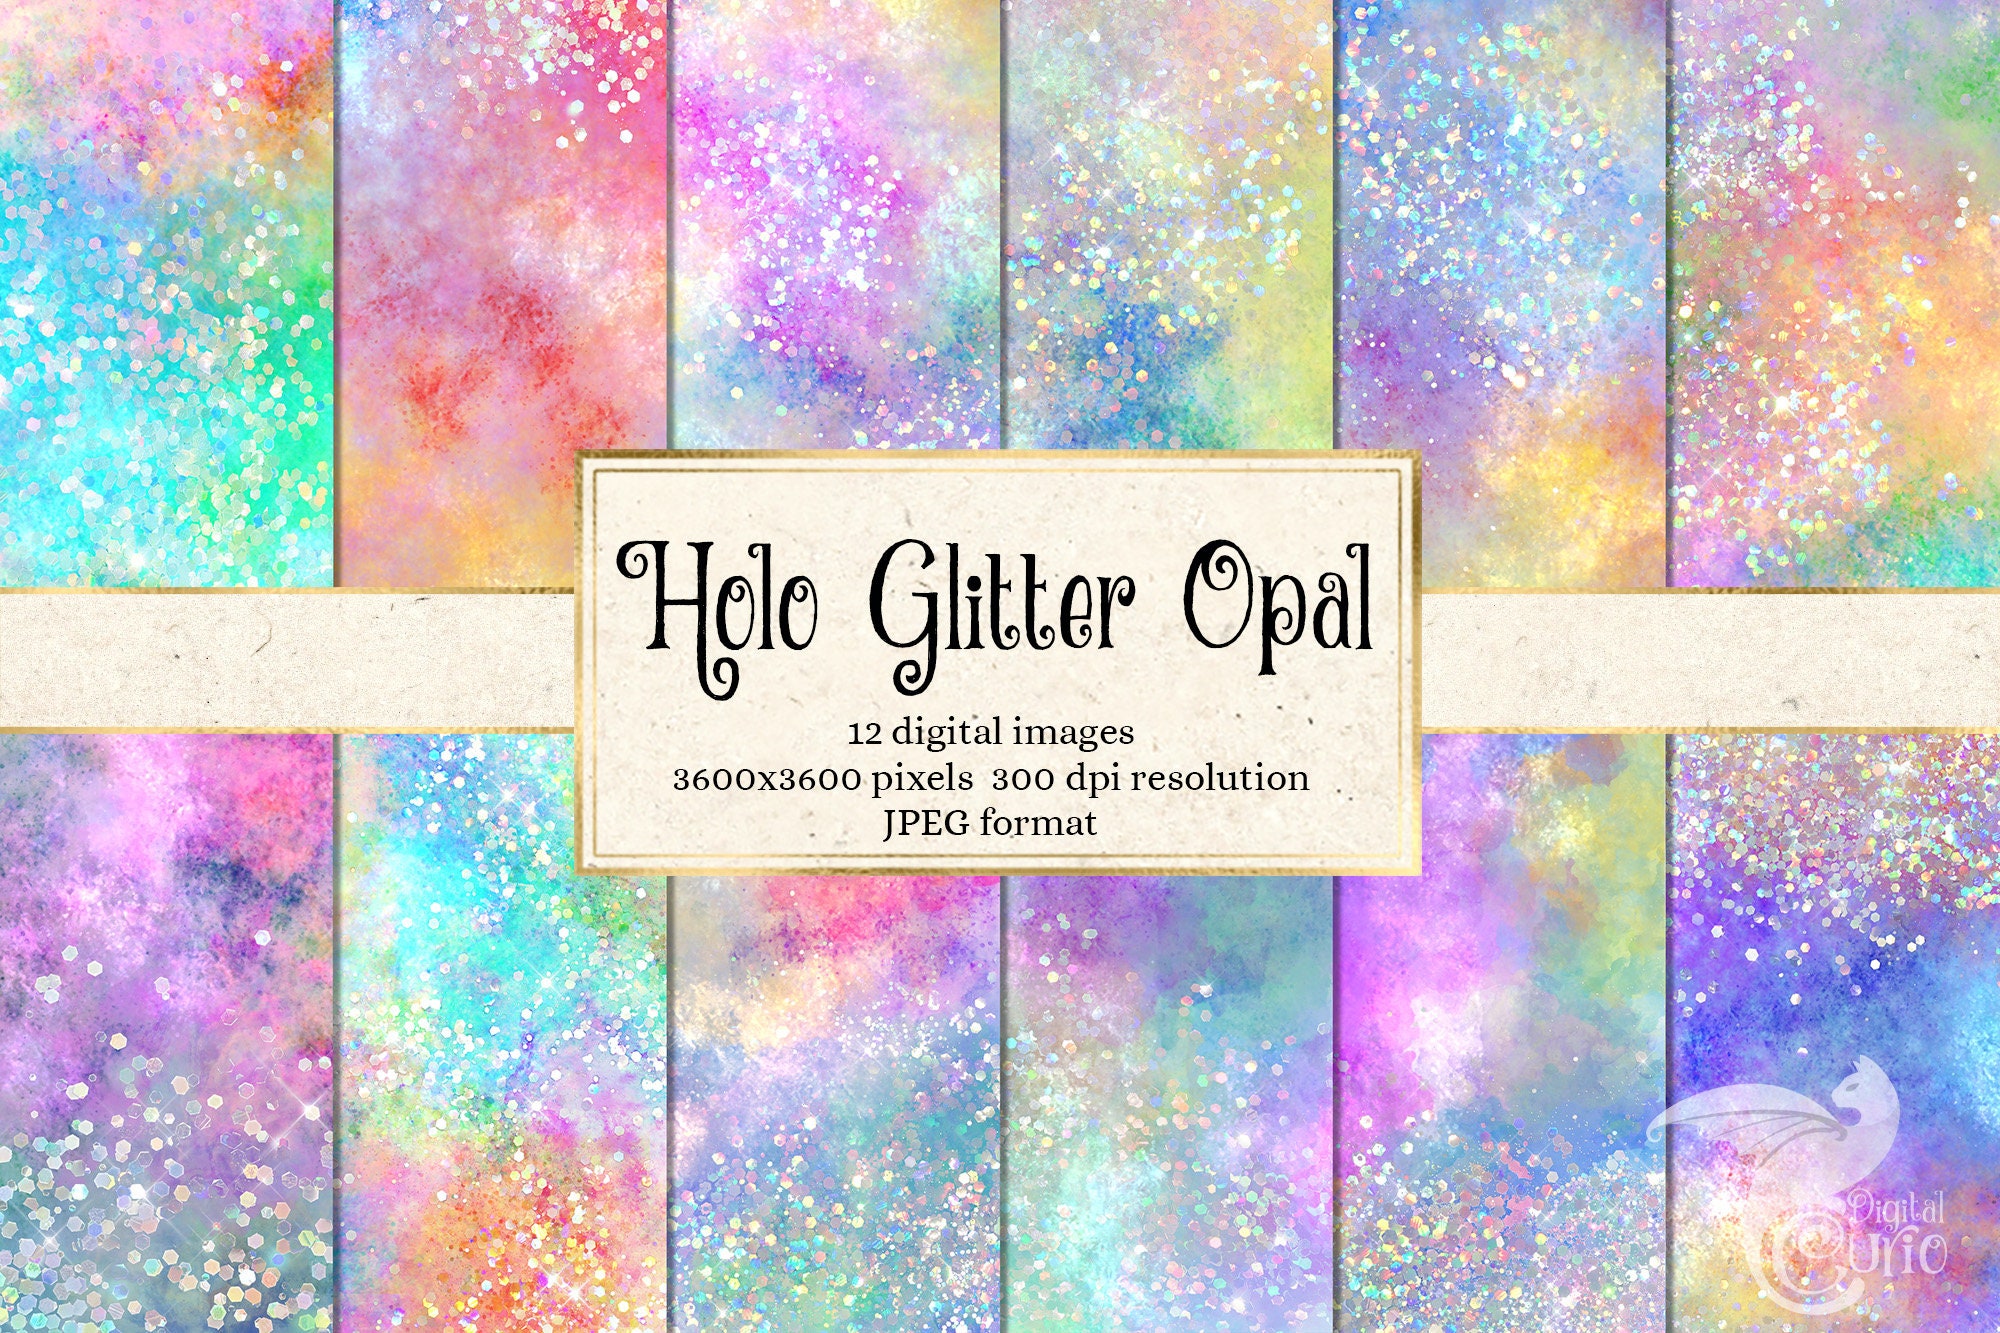 Material Paper - Glitter Paper Holographic Paper DIY Handmaking Specialty Paper